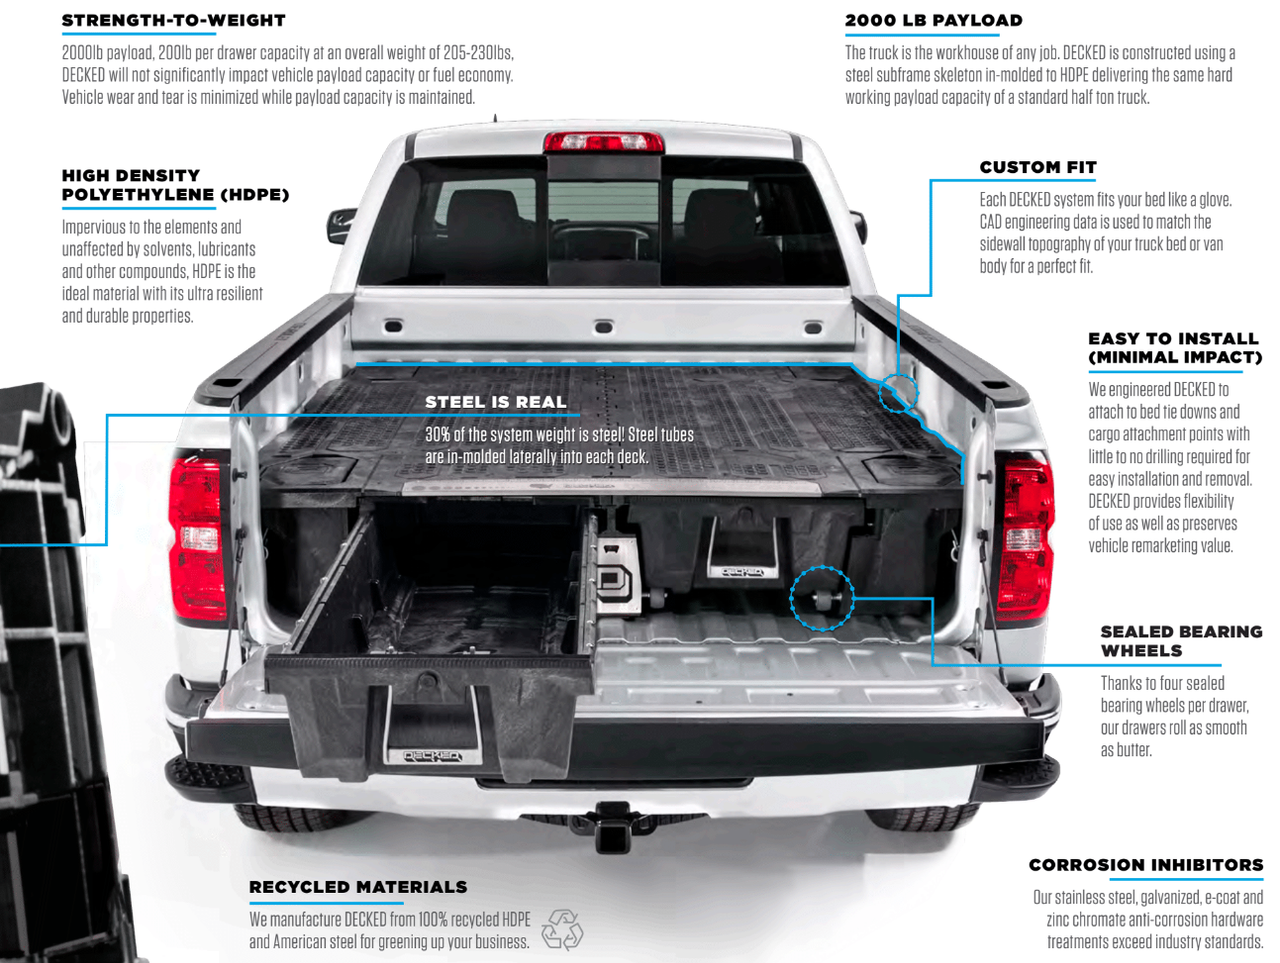 Decked Pickup Truck Weatherproof Storage System with 2 Sliding Drawers, FULL-SIZE, 2000 lb payload, easy install with minor or no drilling, fits Ford Raptor, F-150, Super Duty; GMC & Chevy Silverado, Sierra; Dodge Ram; Toyota Tundra; Nissan Titan